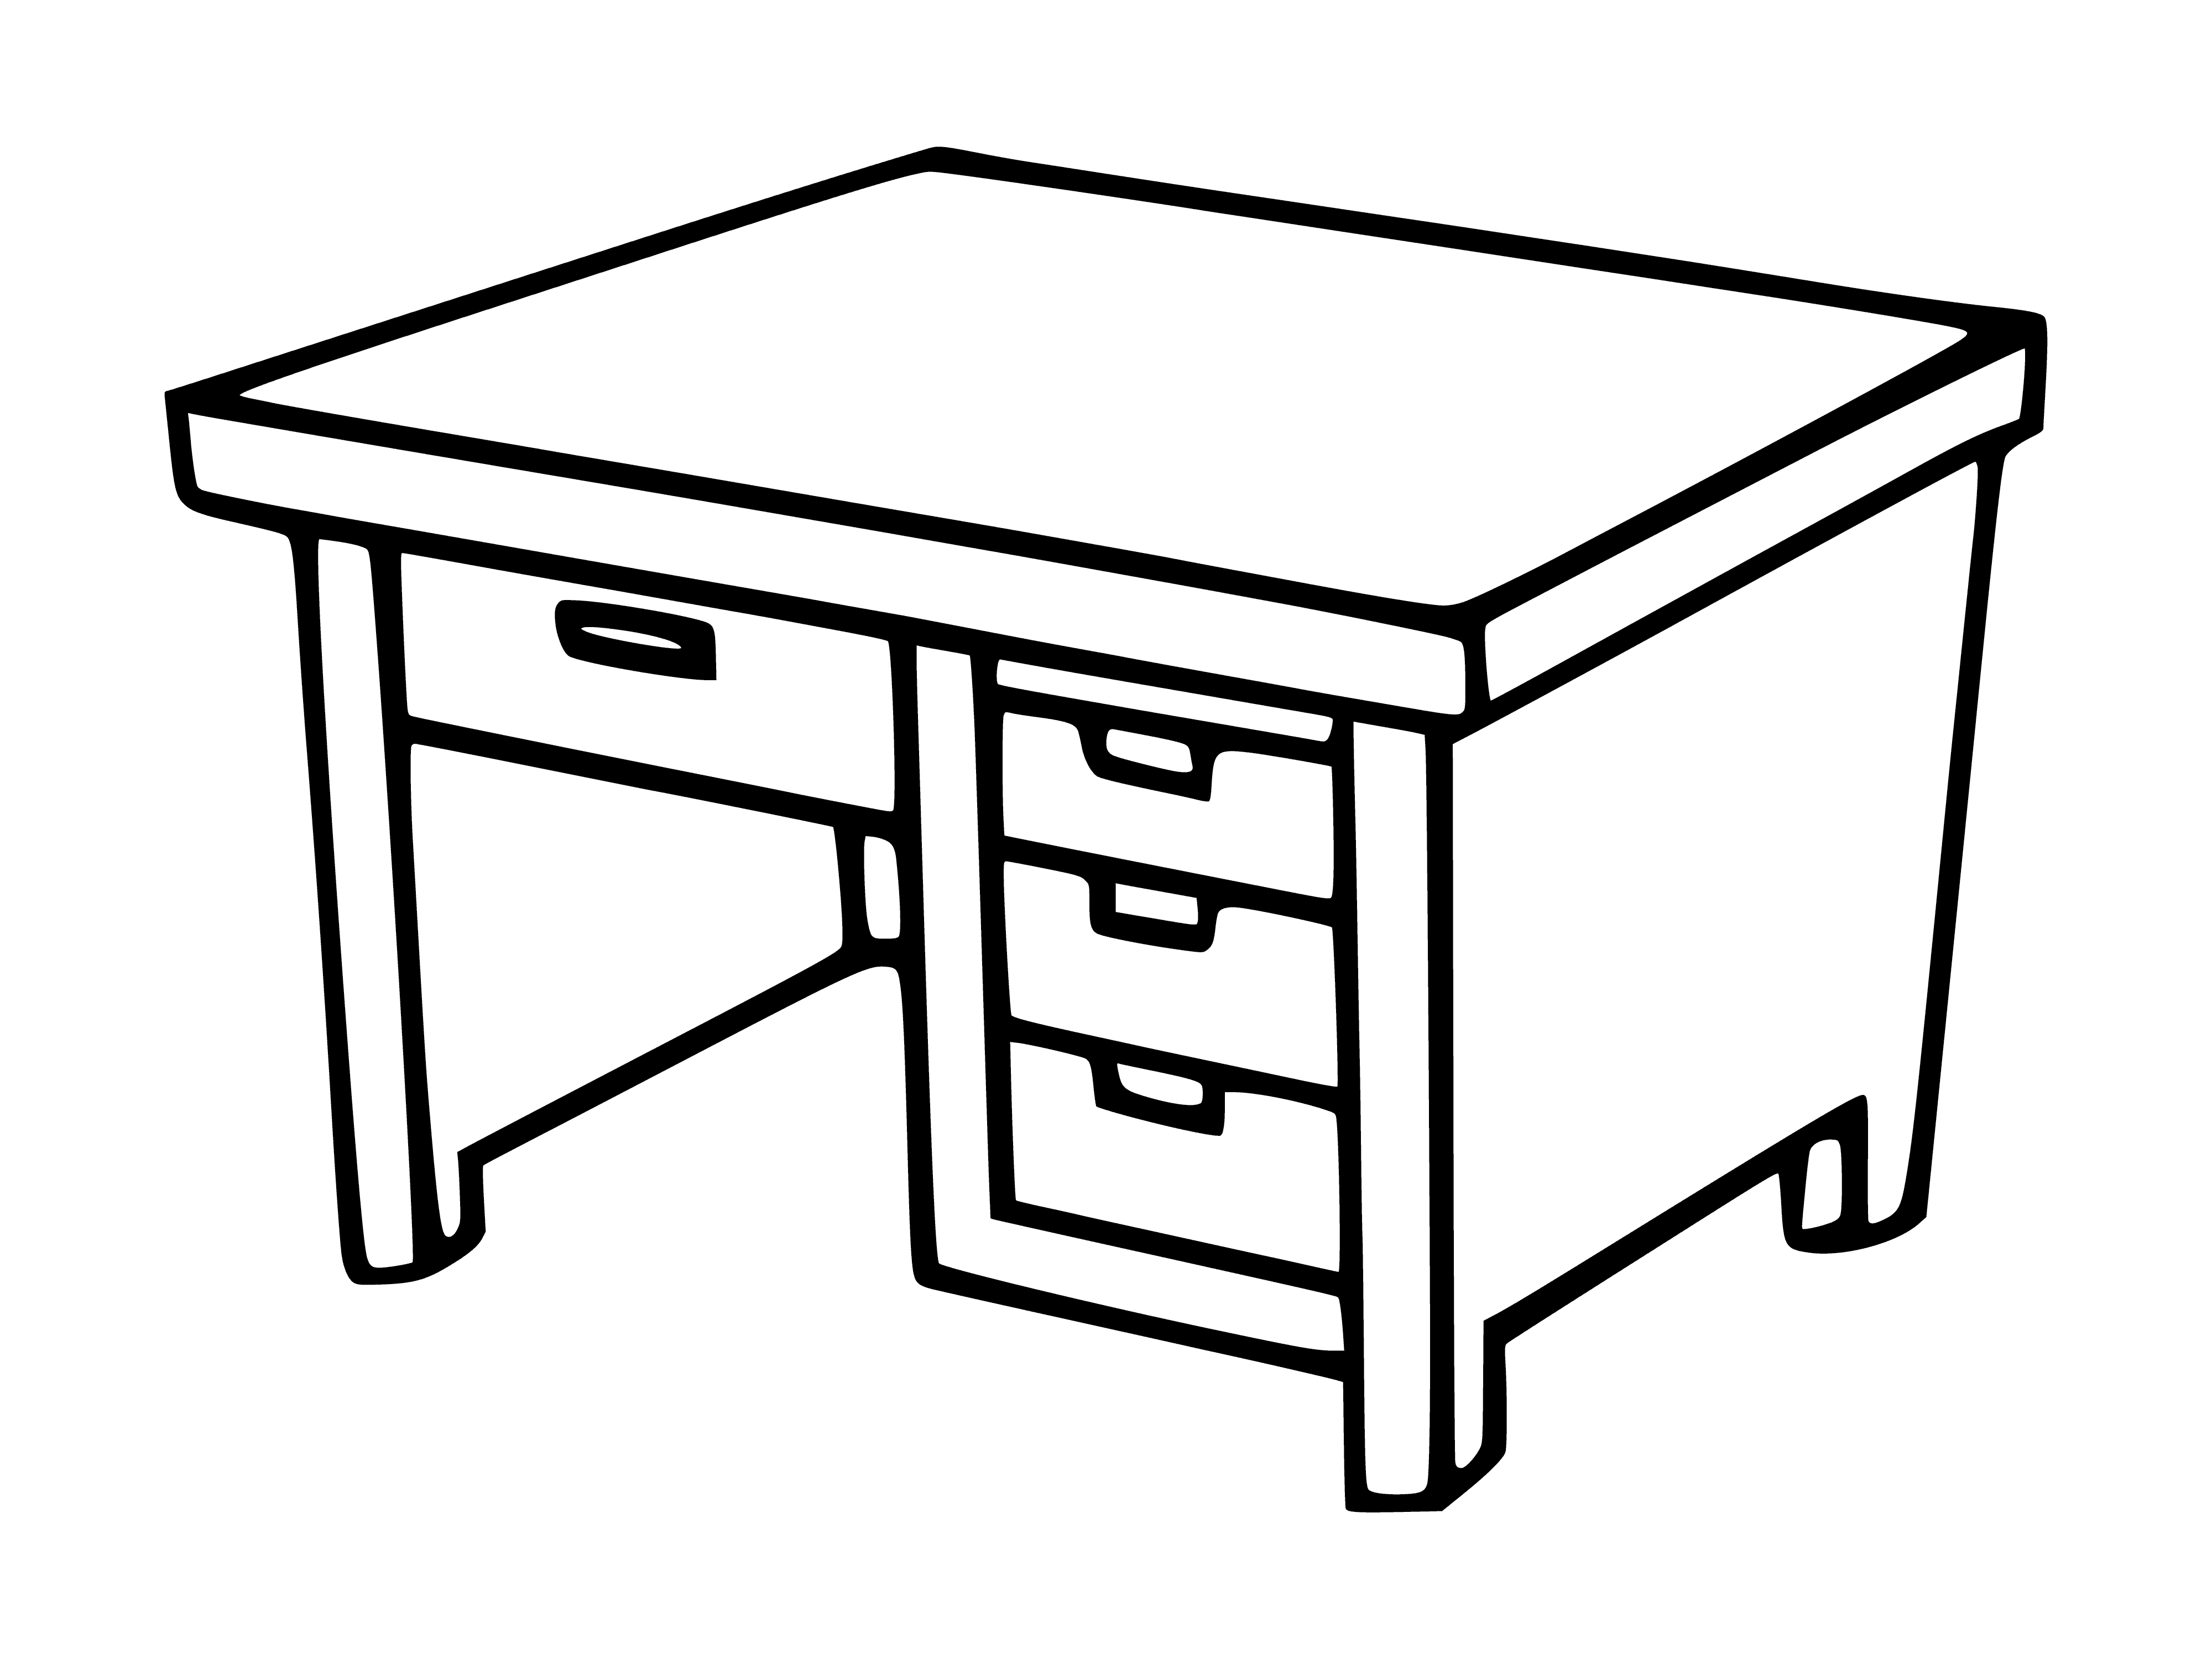 coloring page: Table with 4 legs, brown rectangle top, and center drawer with knob.